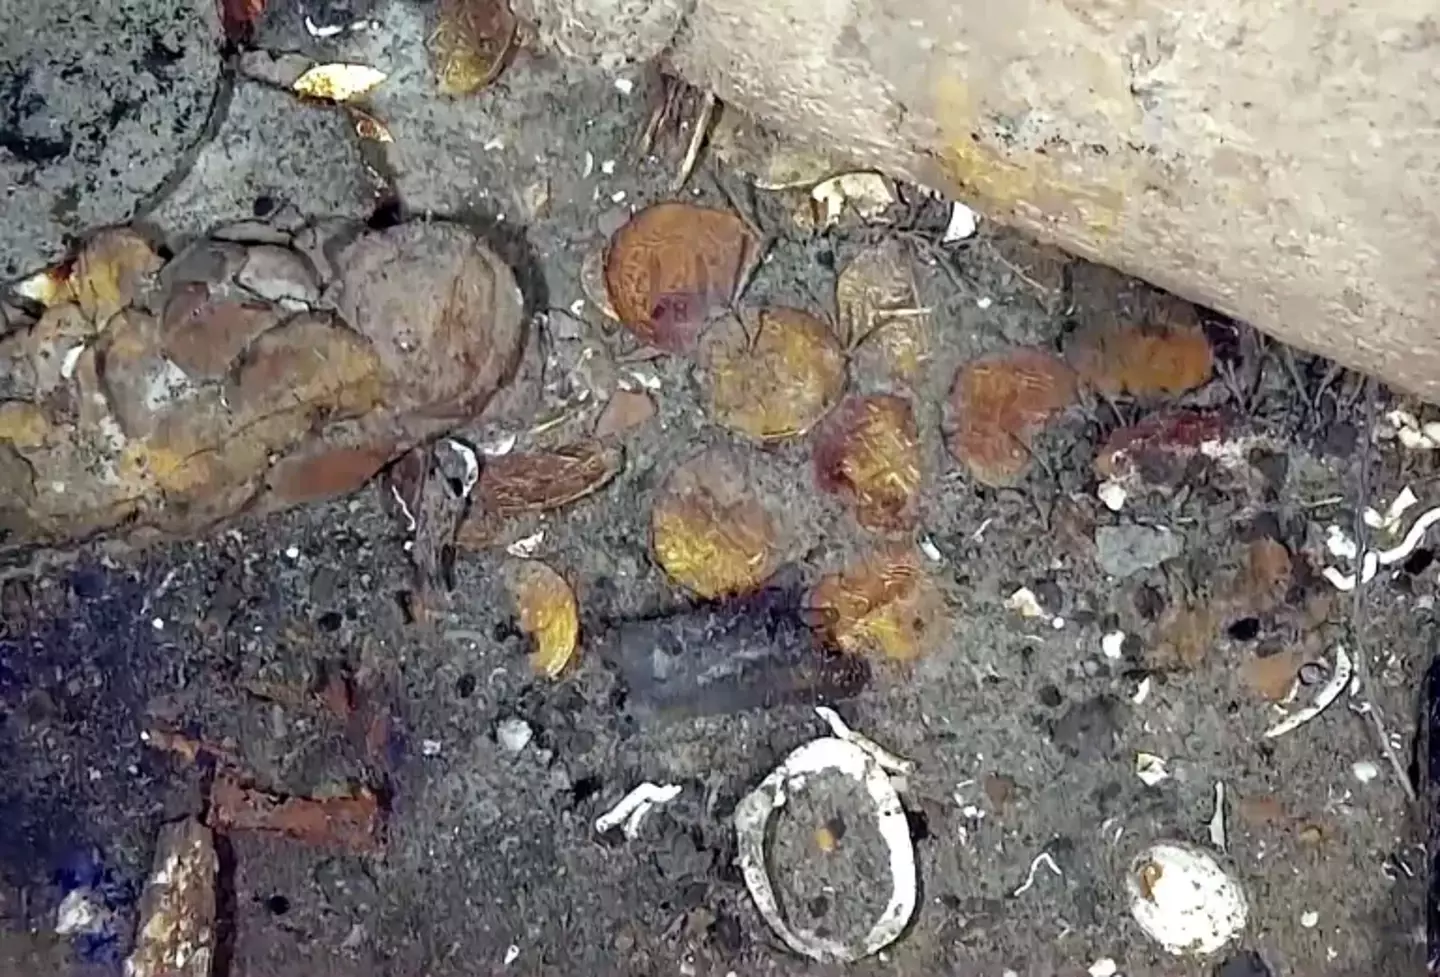 Gold coins are scattered among the wreck.